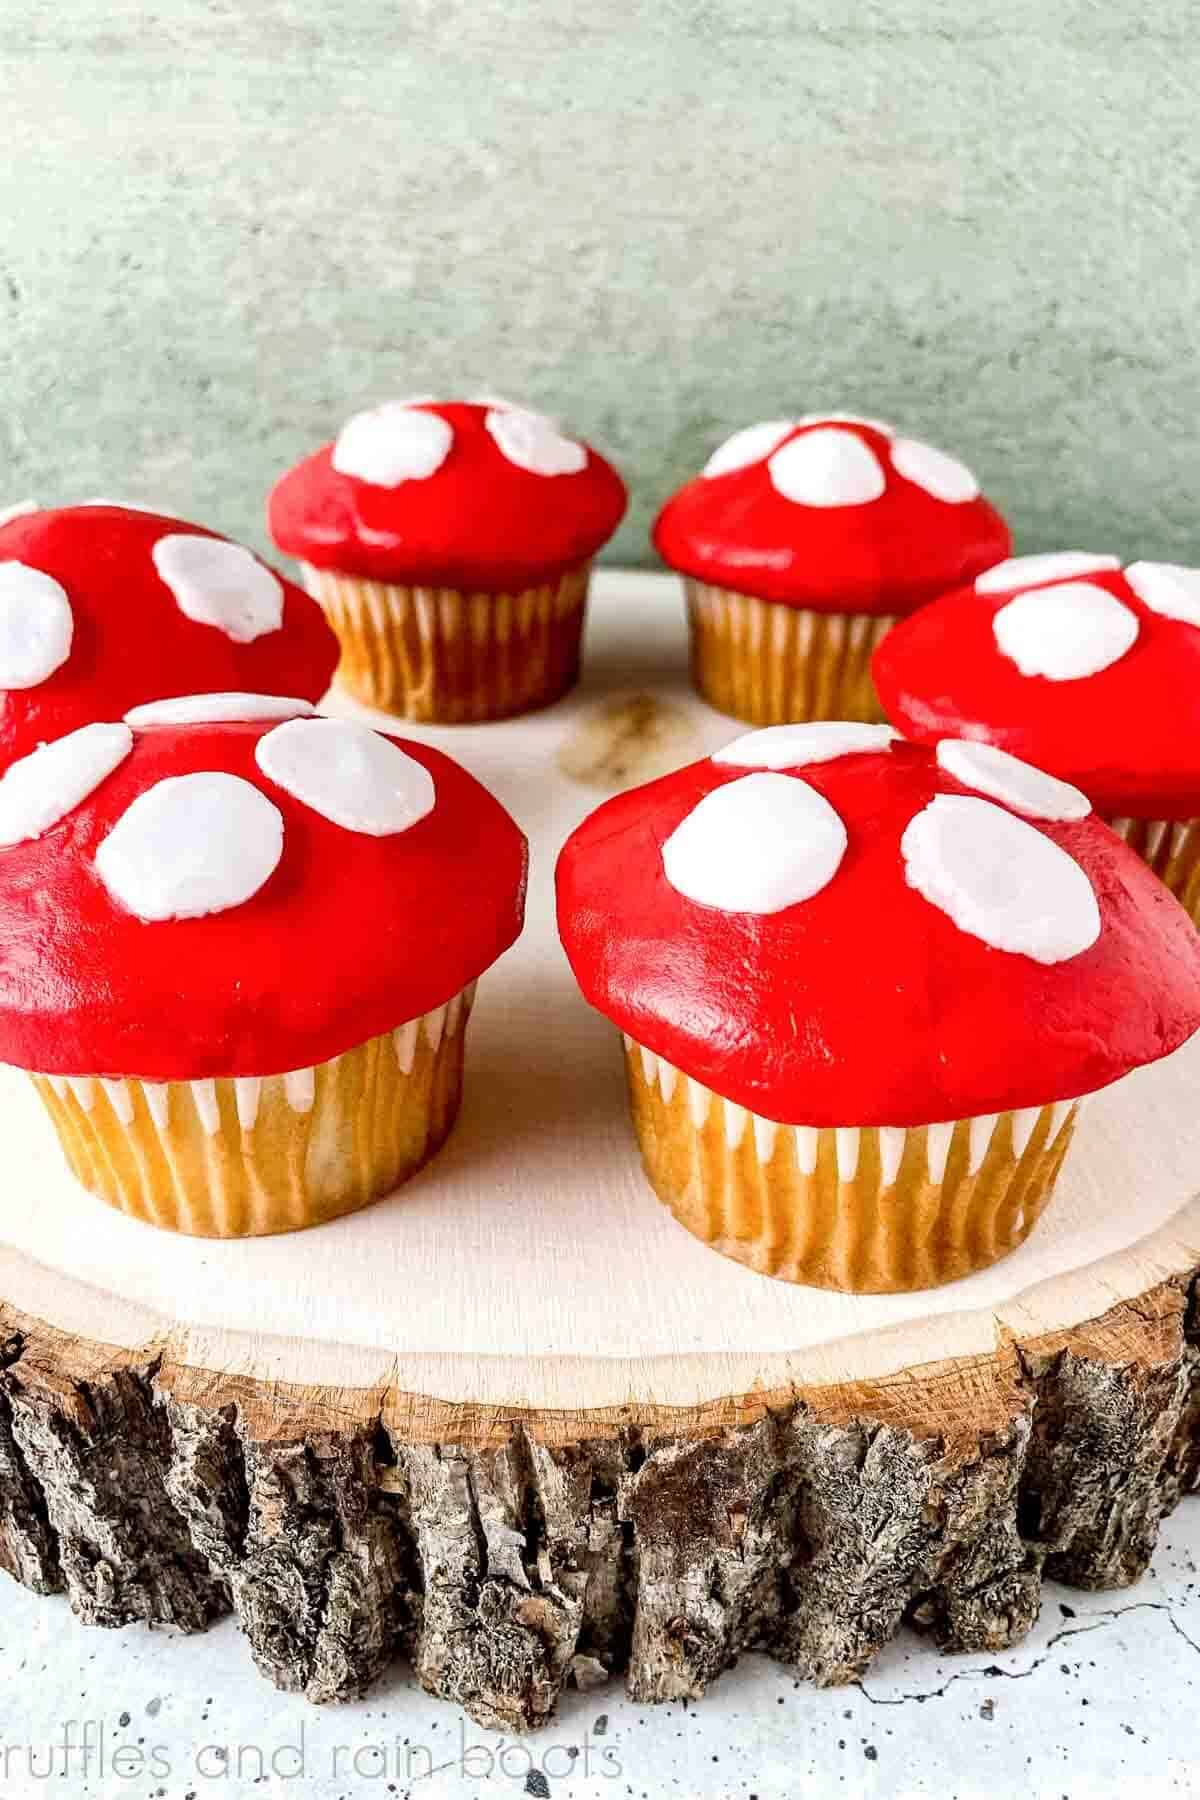 Vertical close up image of red and white mushroom cupcakes placed on a wood round on concrete background.